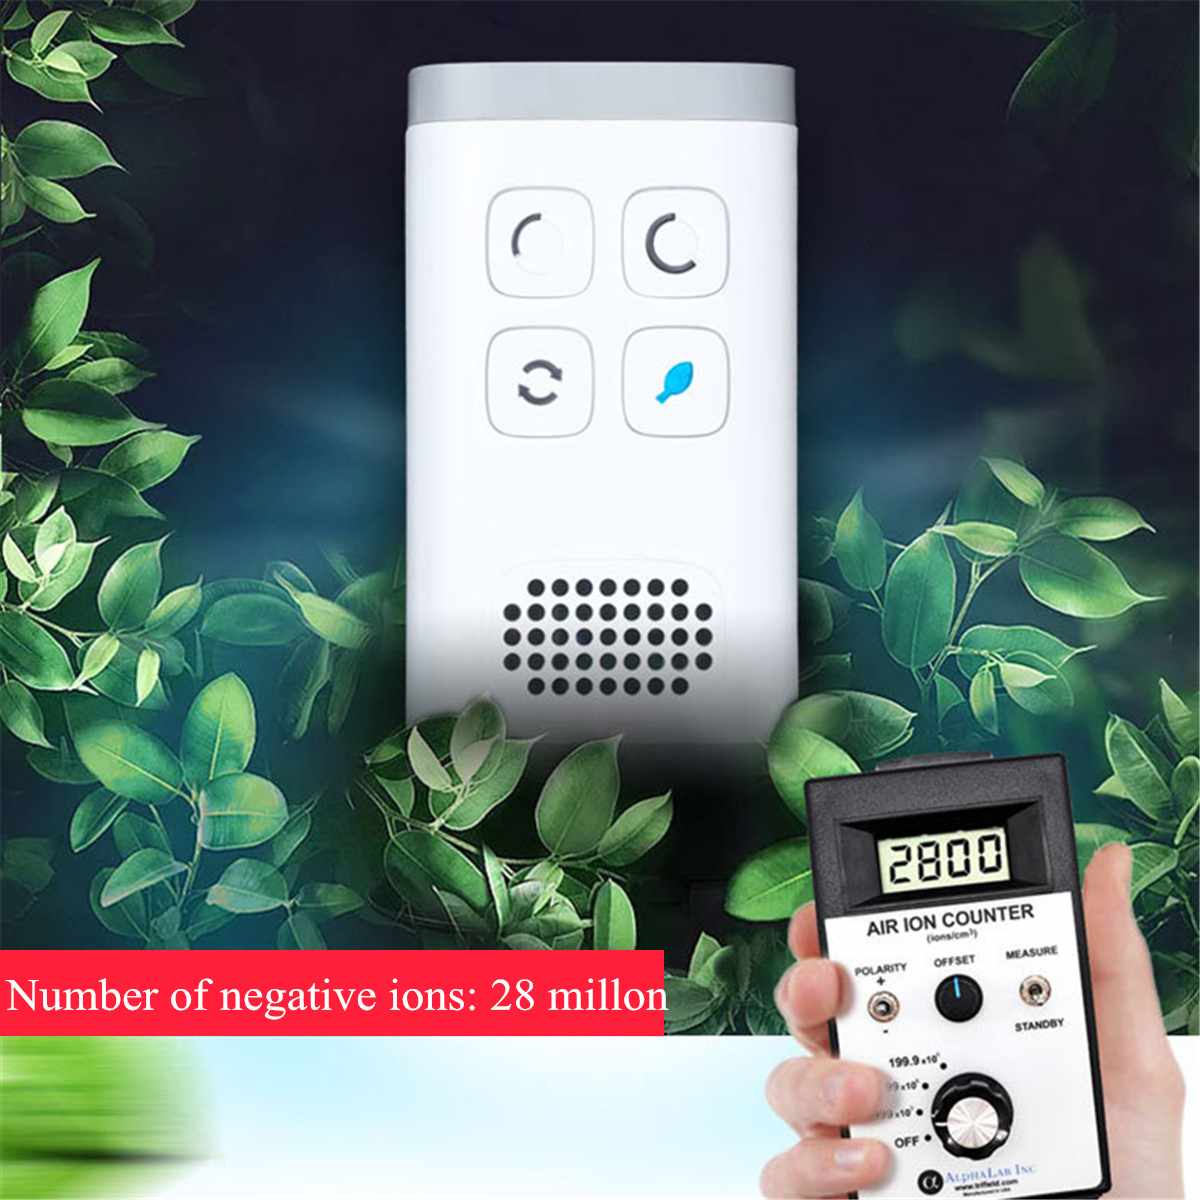 Household ozone disinfection air purifier